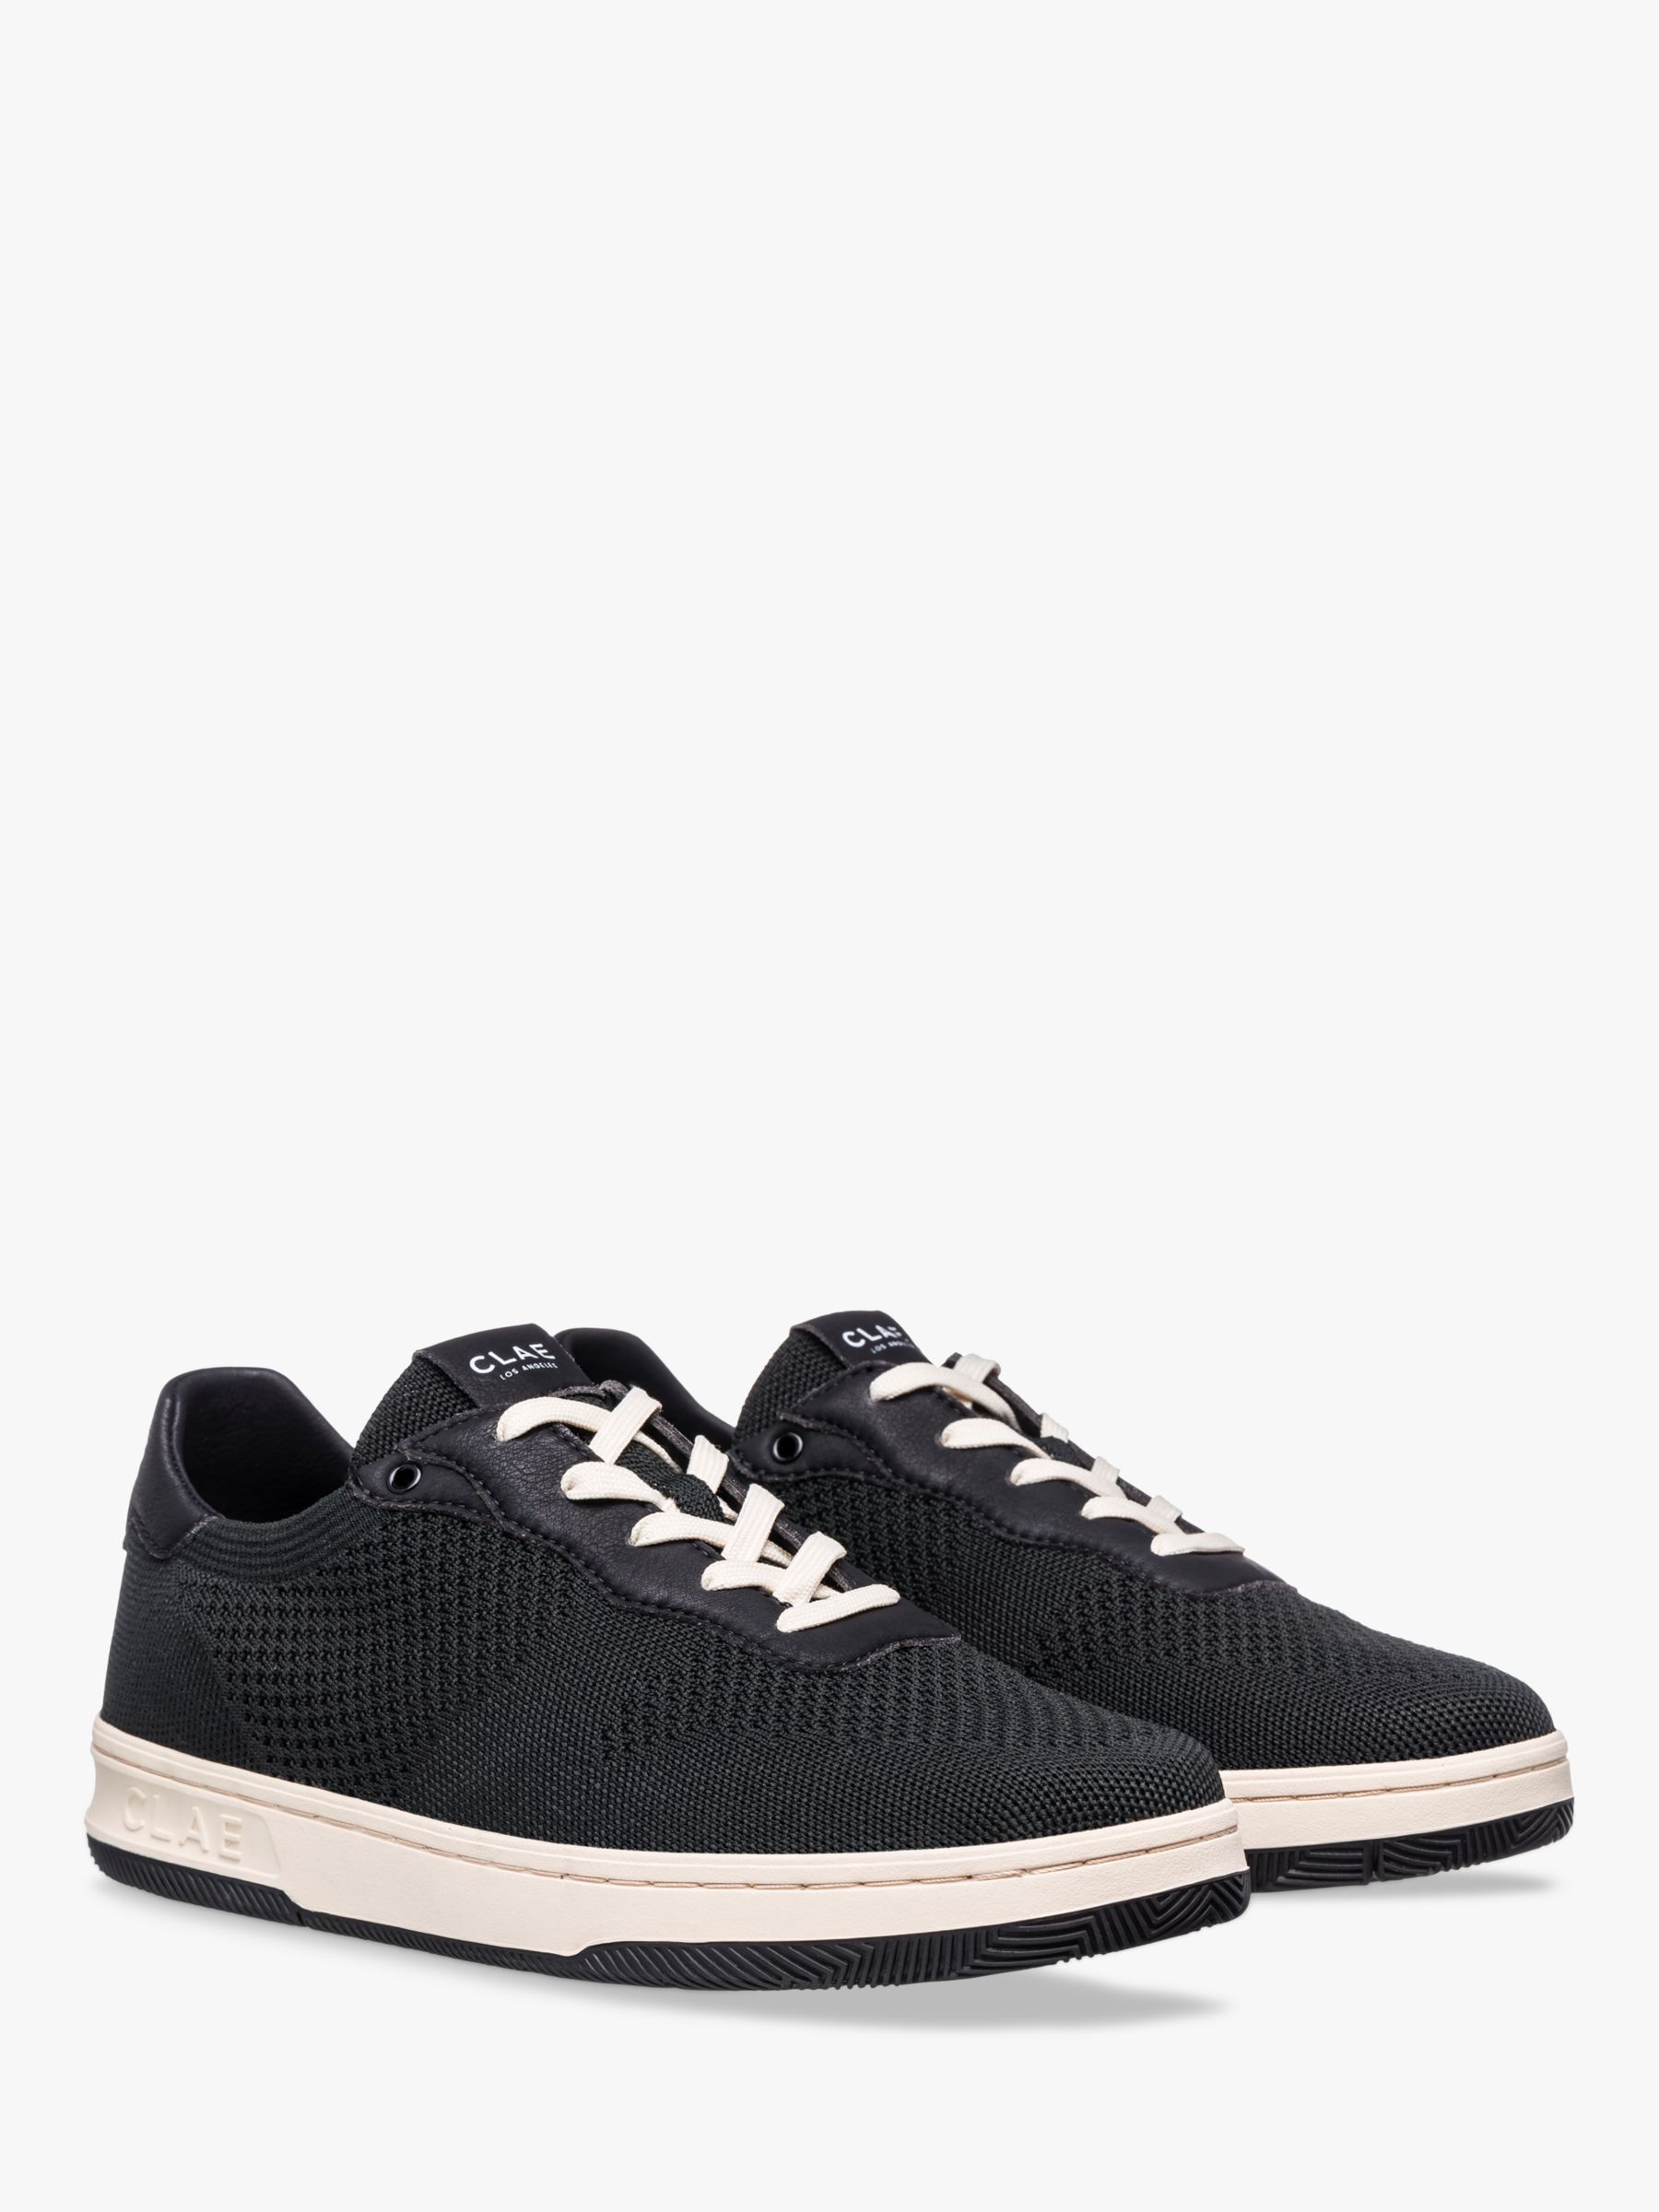 CLAE Malone Knitted Lace Up Trainers, Black, 7.5